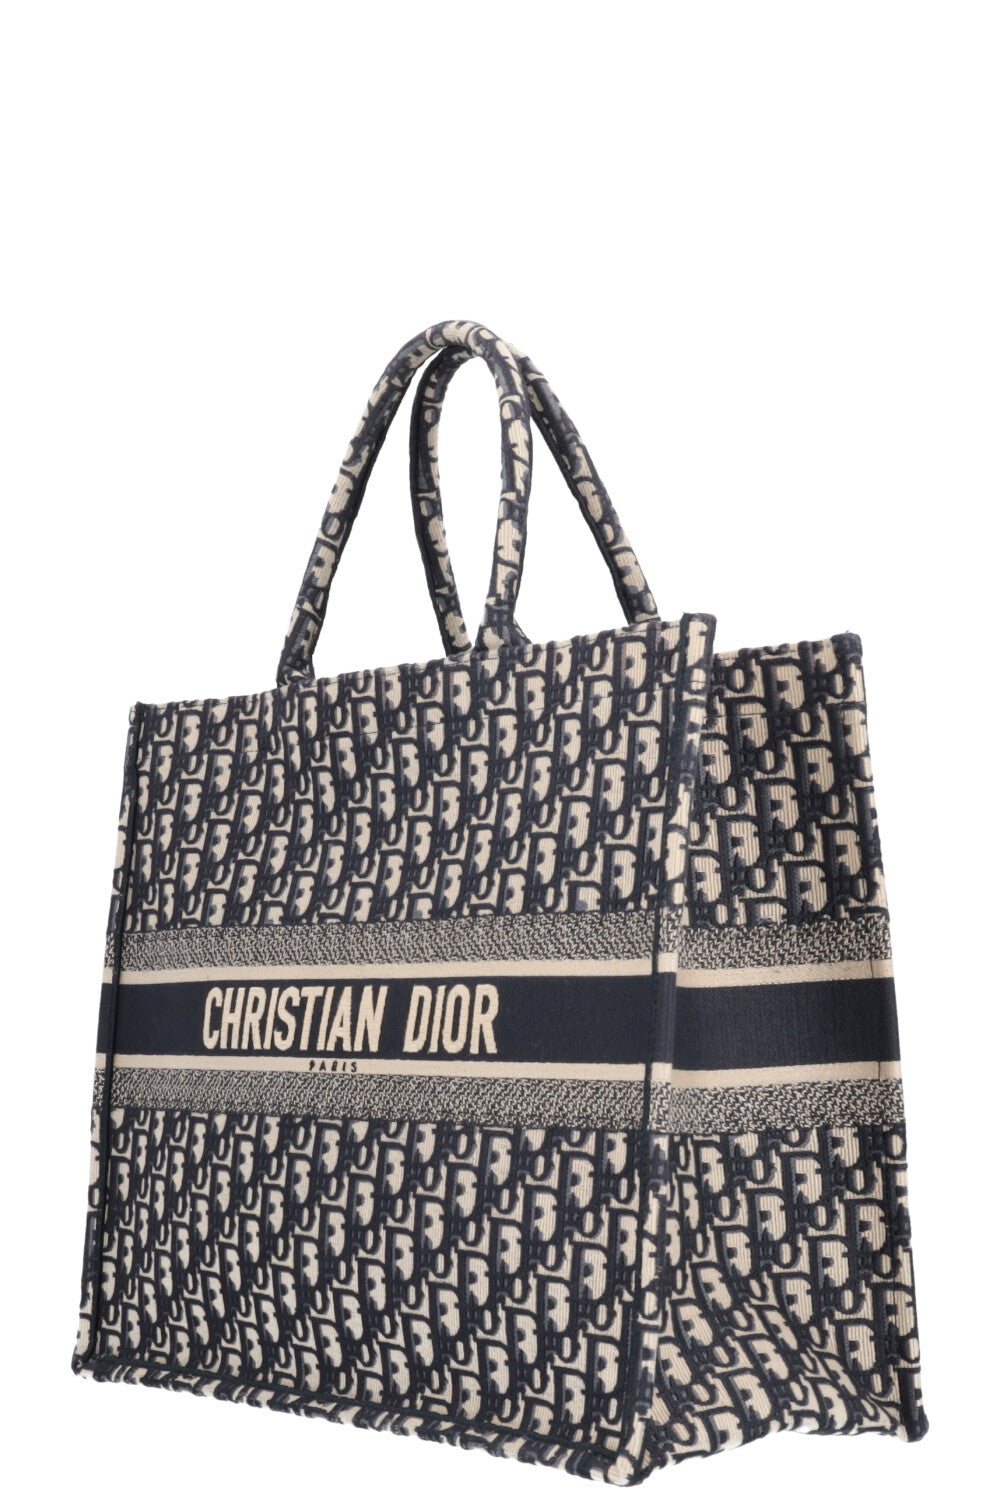 CHRISTIAN DIOR Large Book Tote